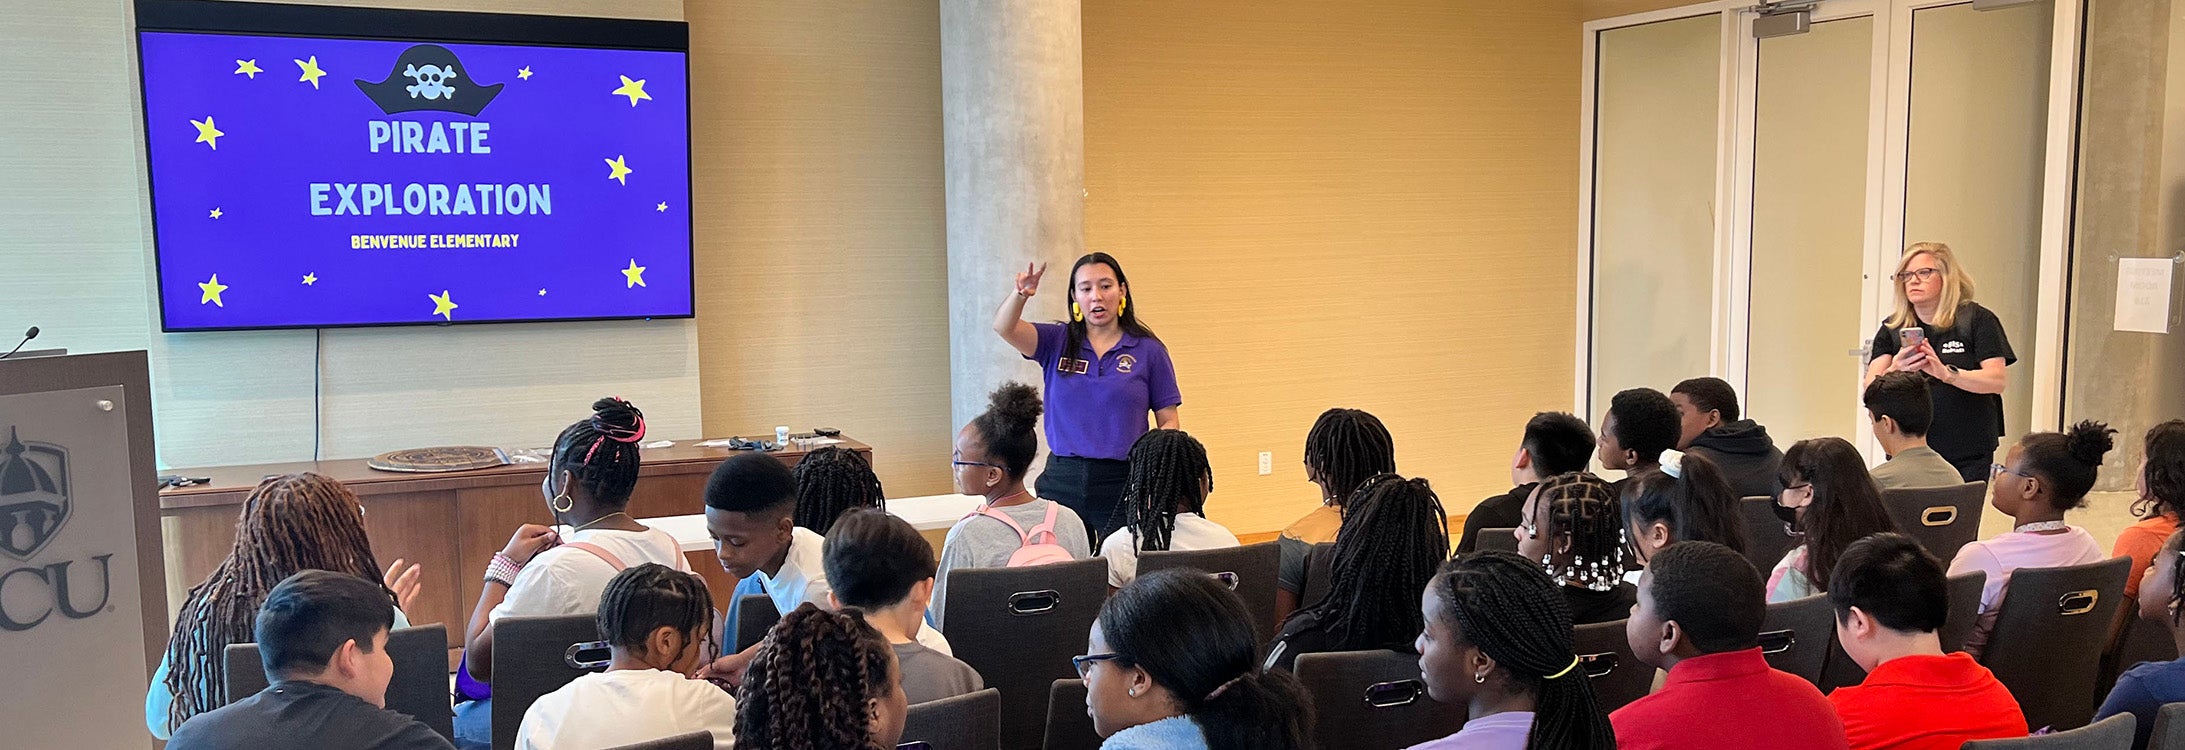 Nearly 100 fifth grade students from two North Carolina elementary schools visited East Carolina University this spring to tour the campus and learn about the educational, recreational and career possibilities available to them as future Pirates. (Contributed photo by Jean-Luc Scemama)